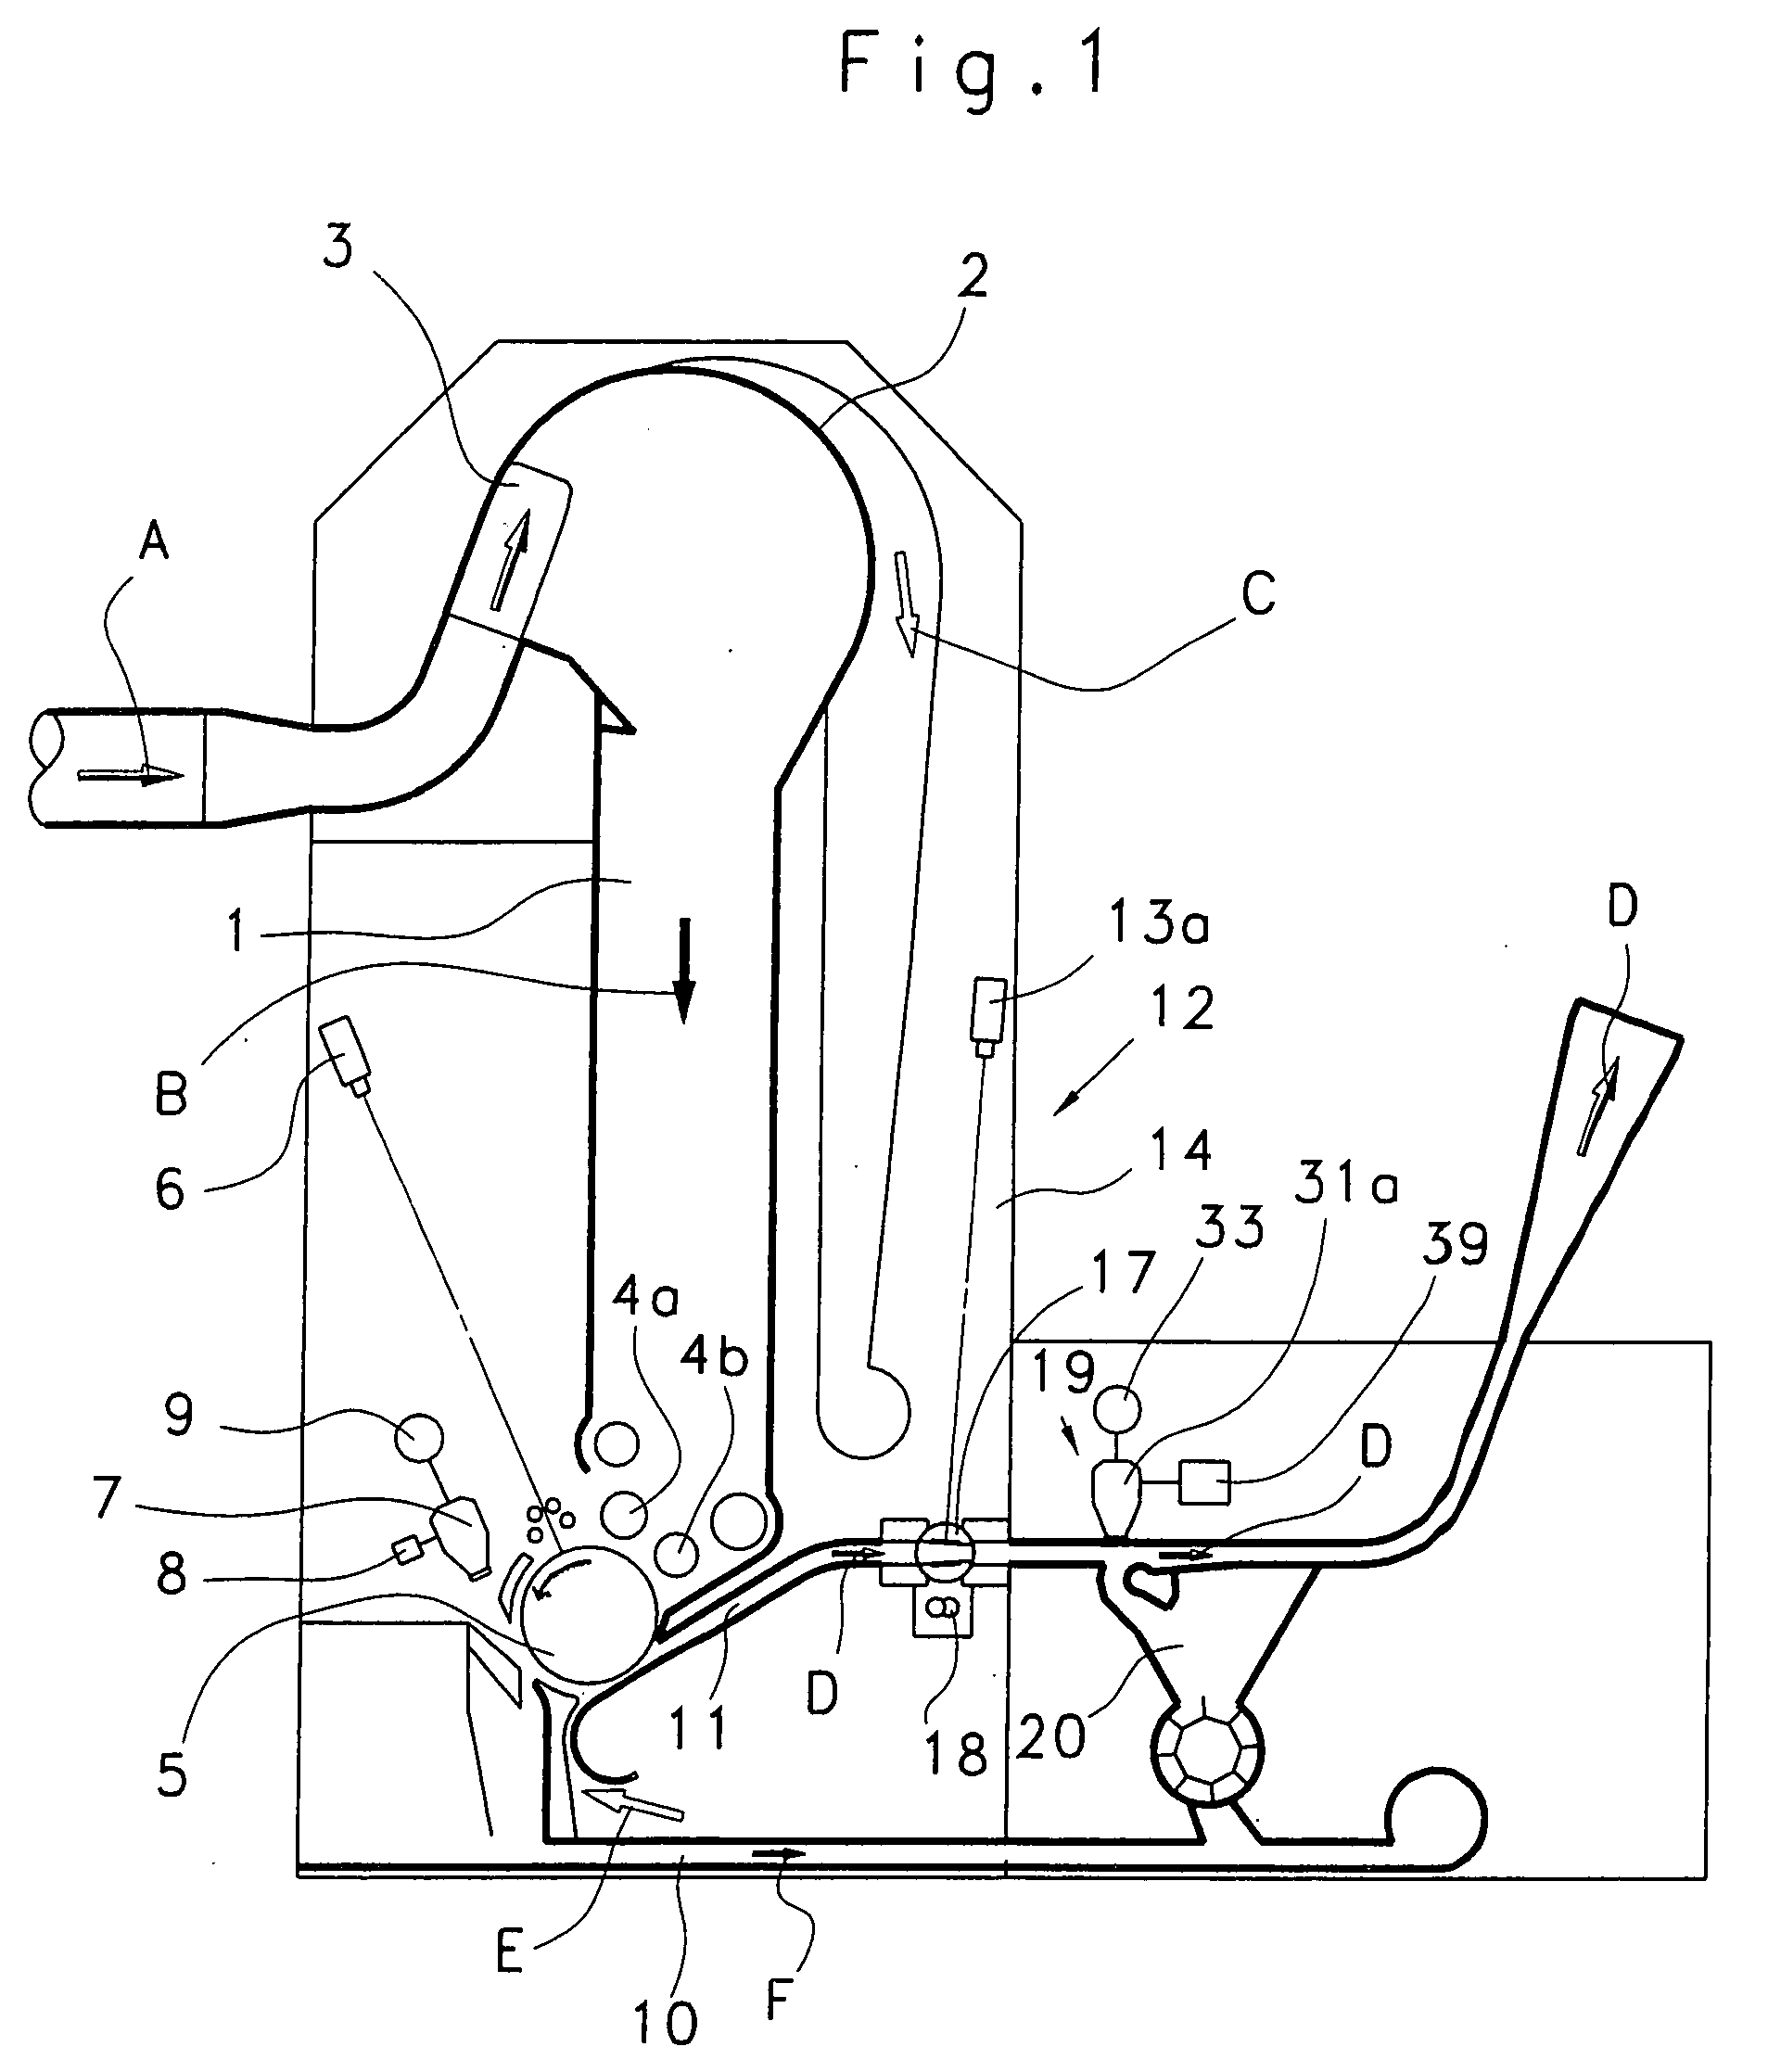 Apparatus at a spinning preparatory plant for detecting foreign objects in fibre material